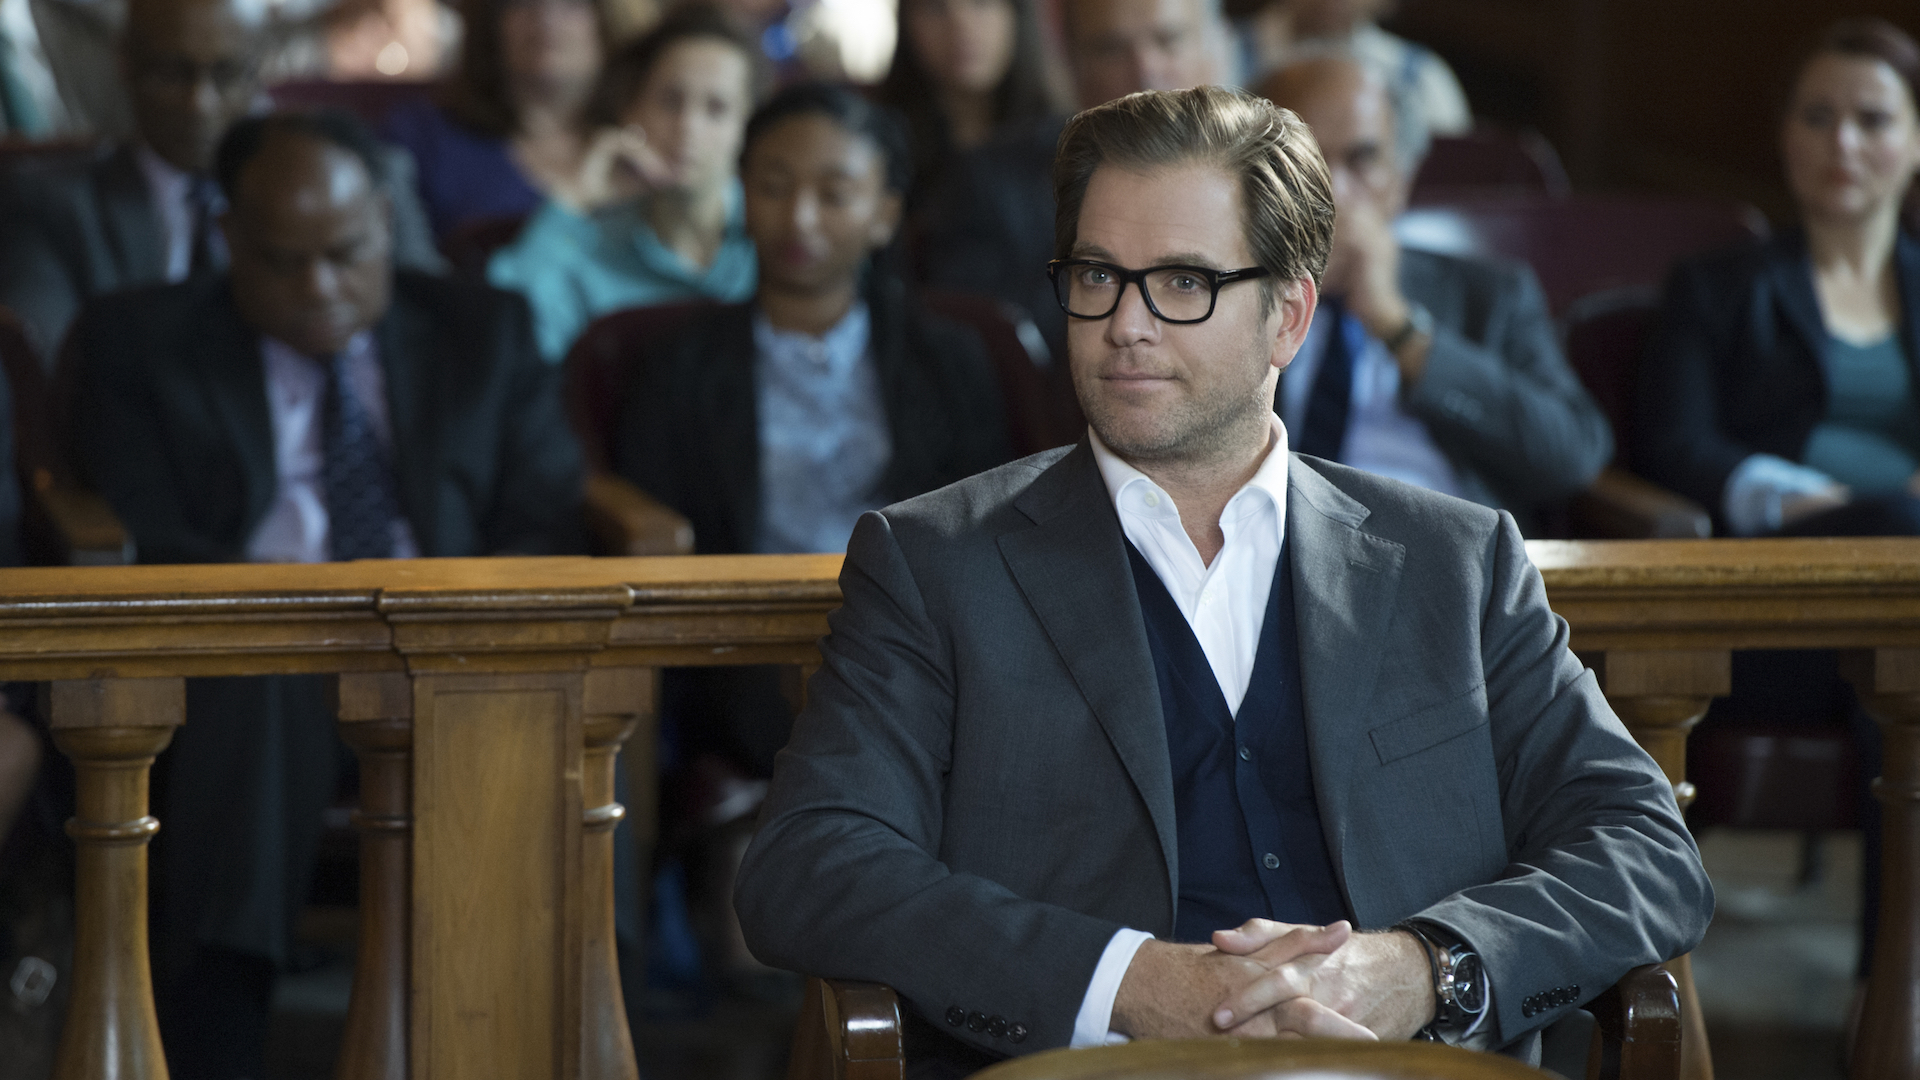 ION TV Adds Bull to Its Lineup Next Week